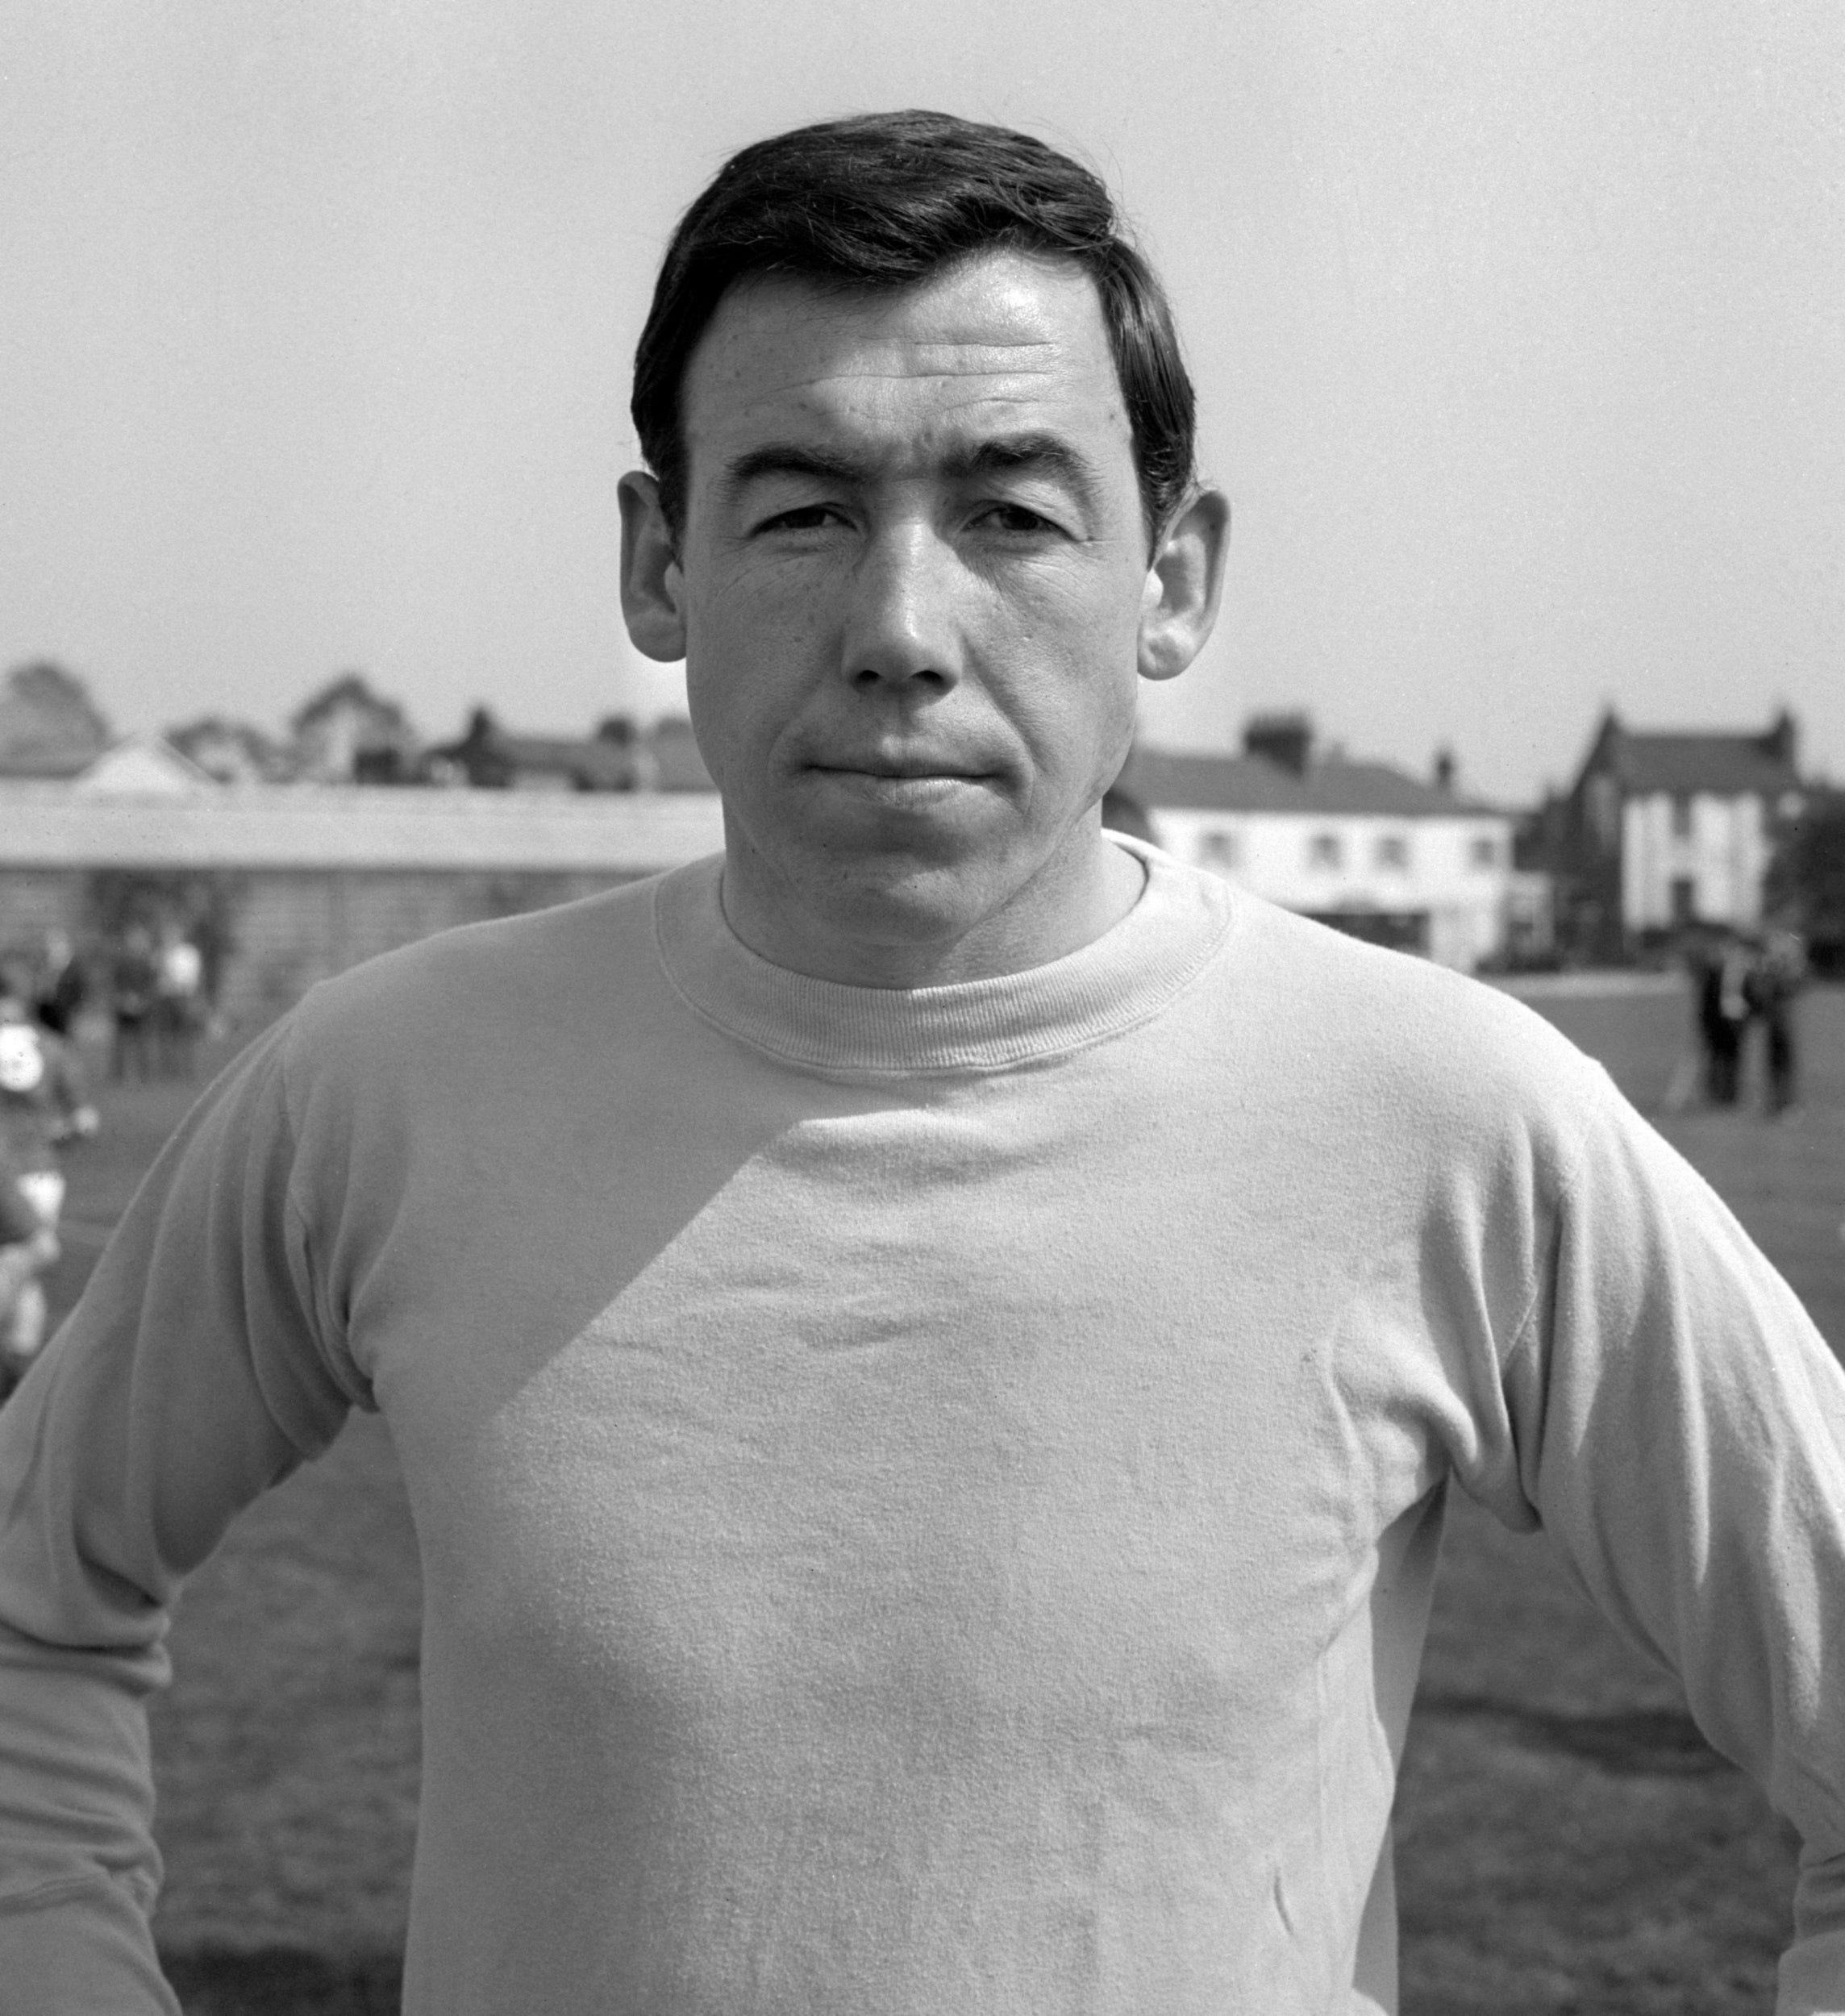 Banks at Leicester in 1966